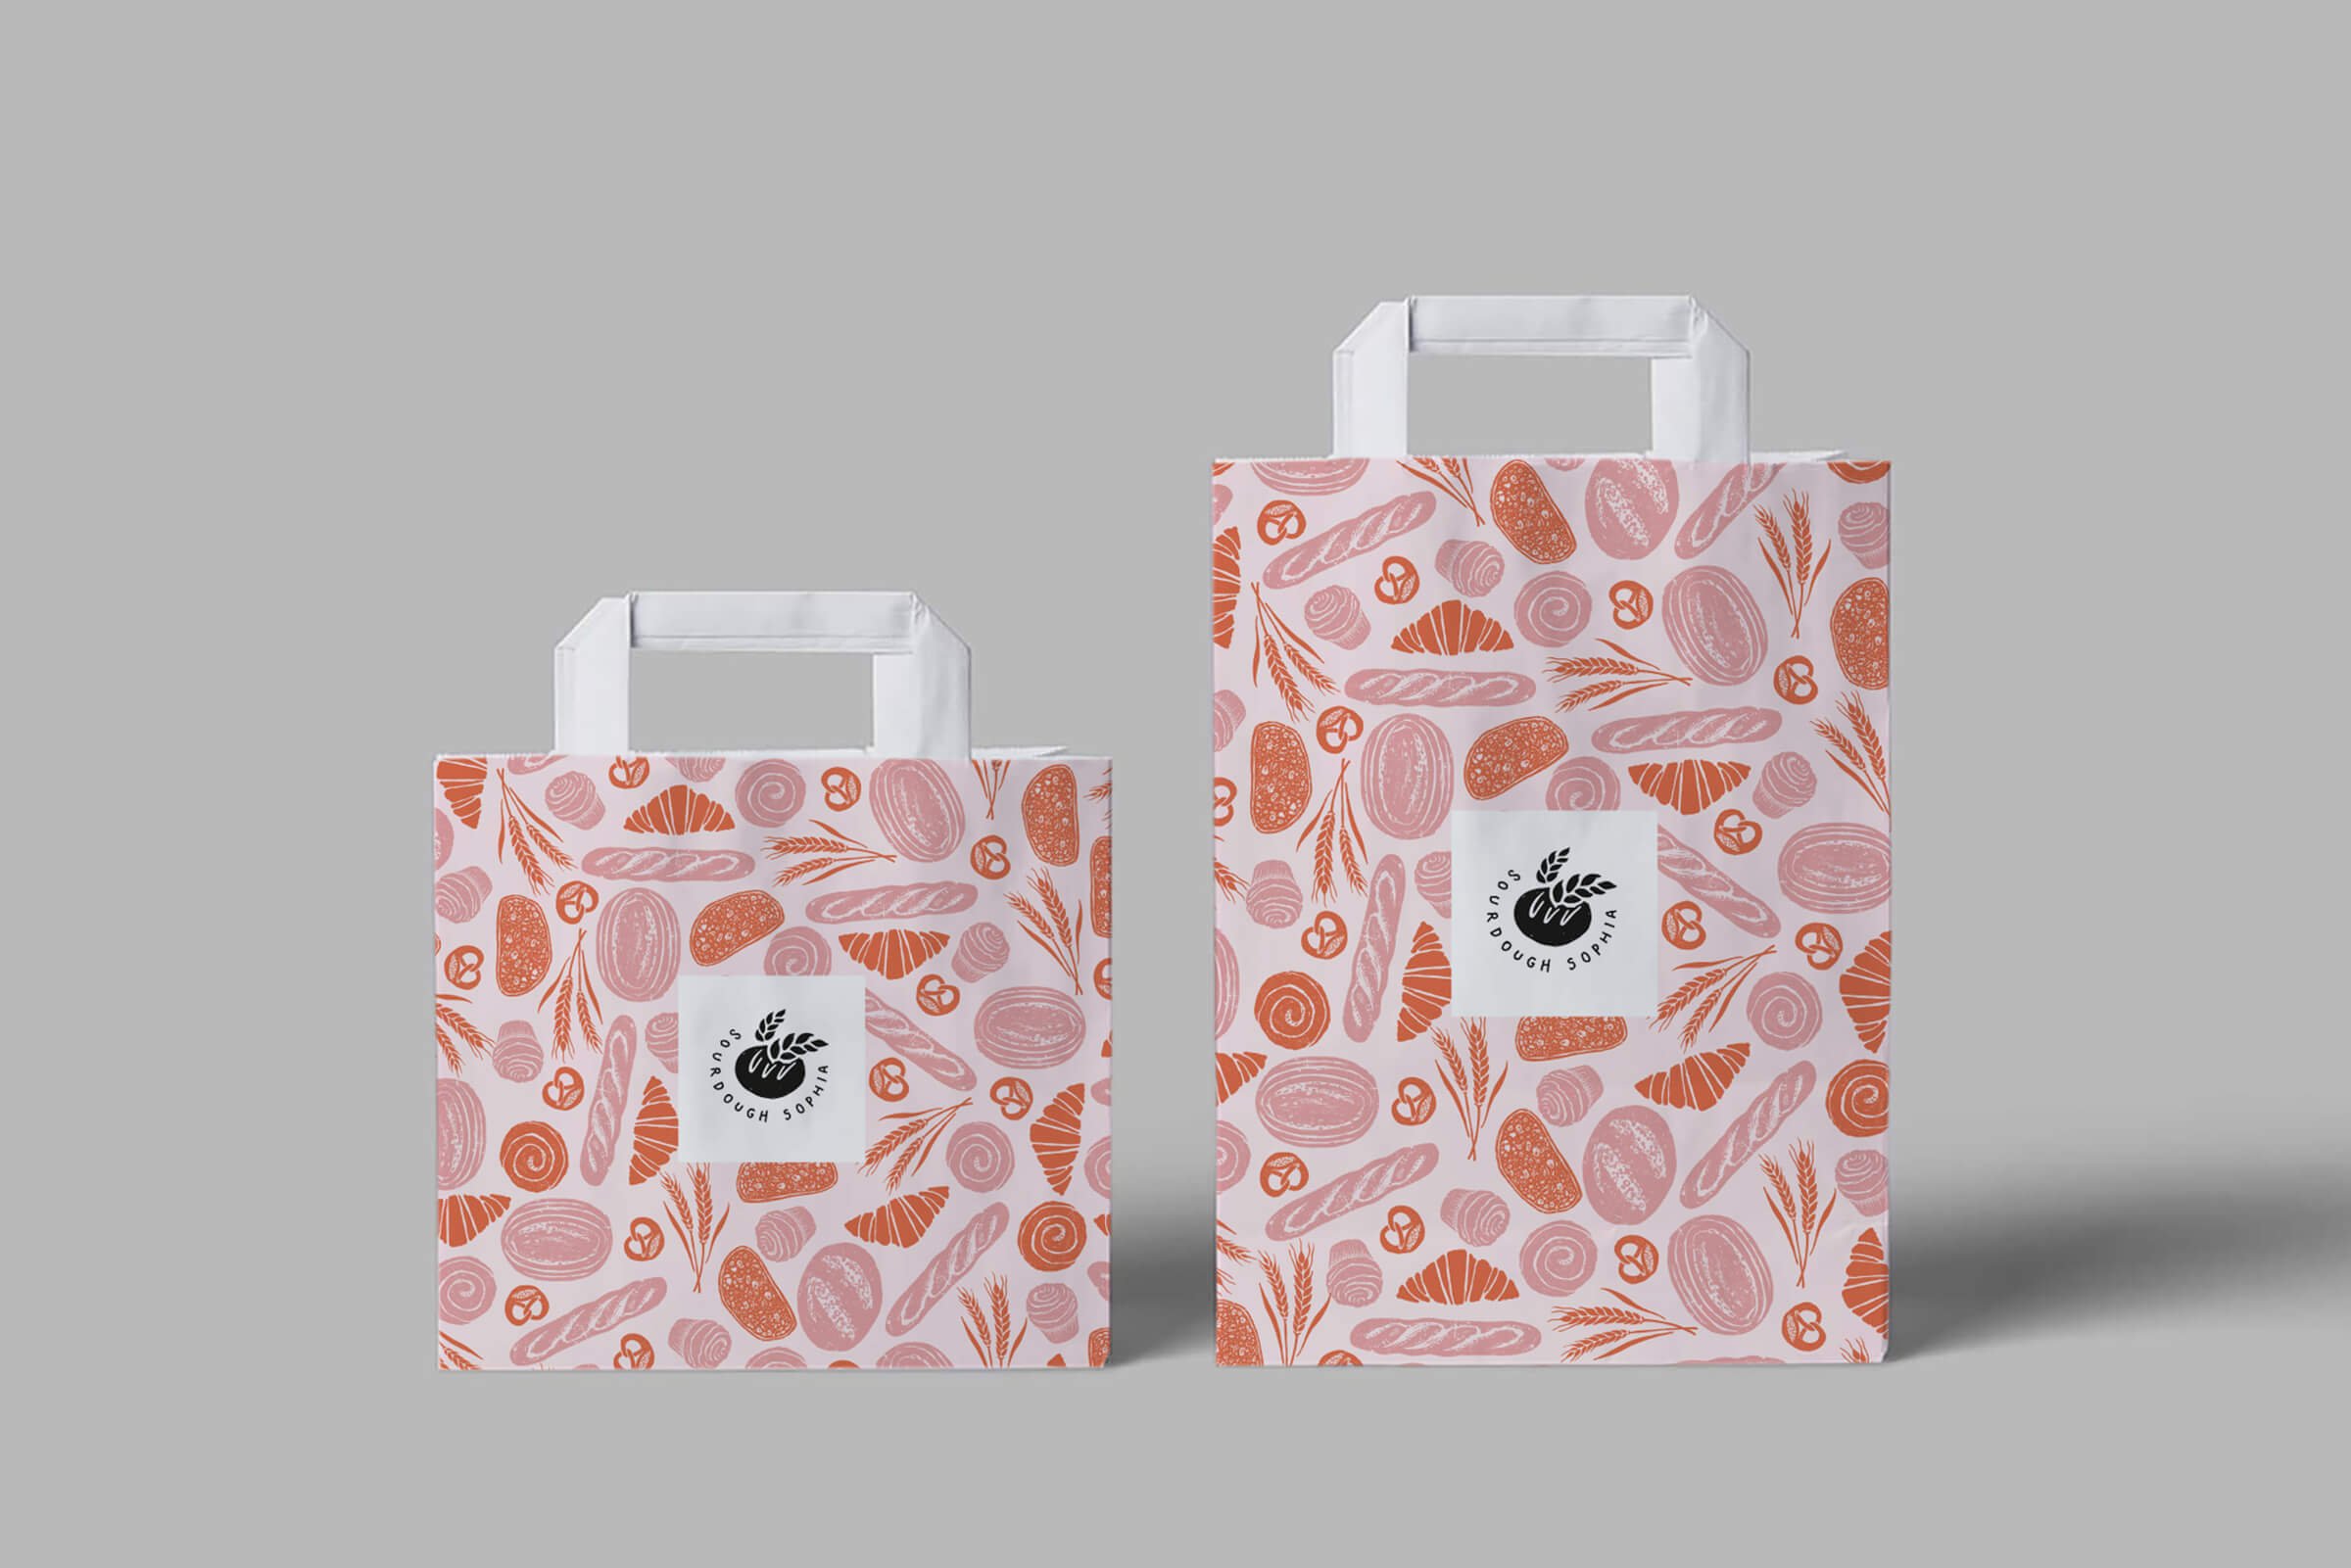  illustrated bags for a bakery called Sourdough Sophia 